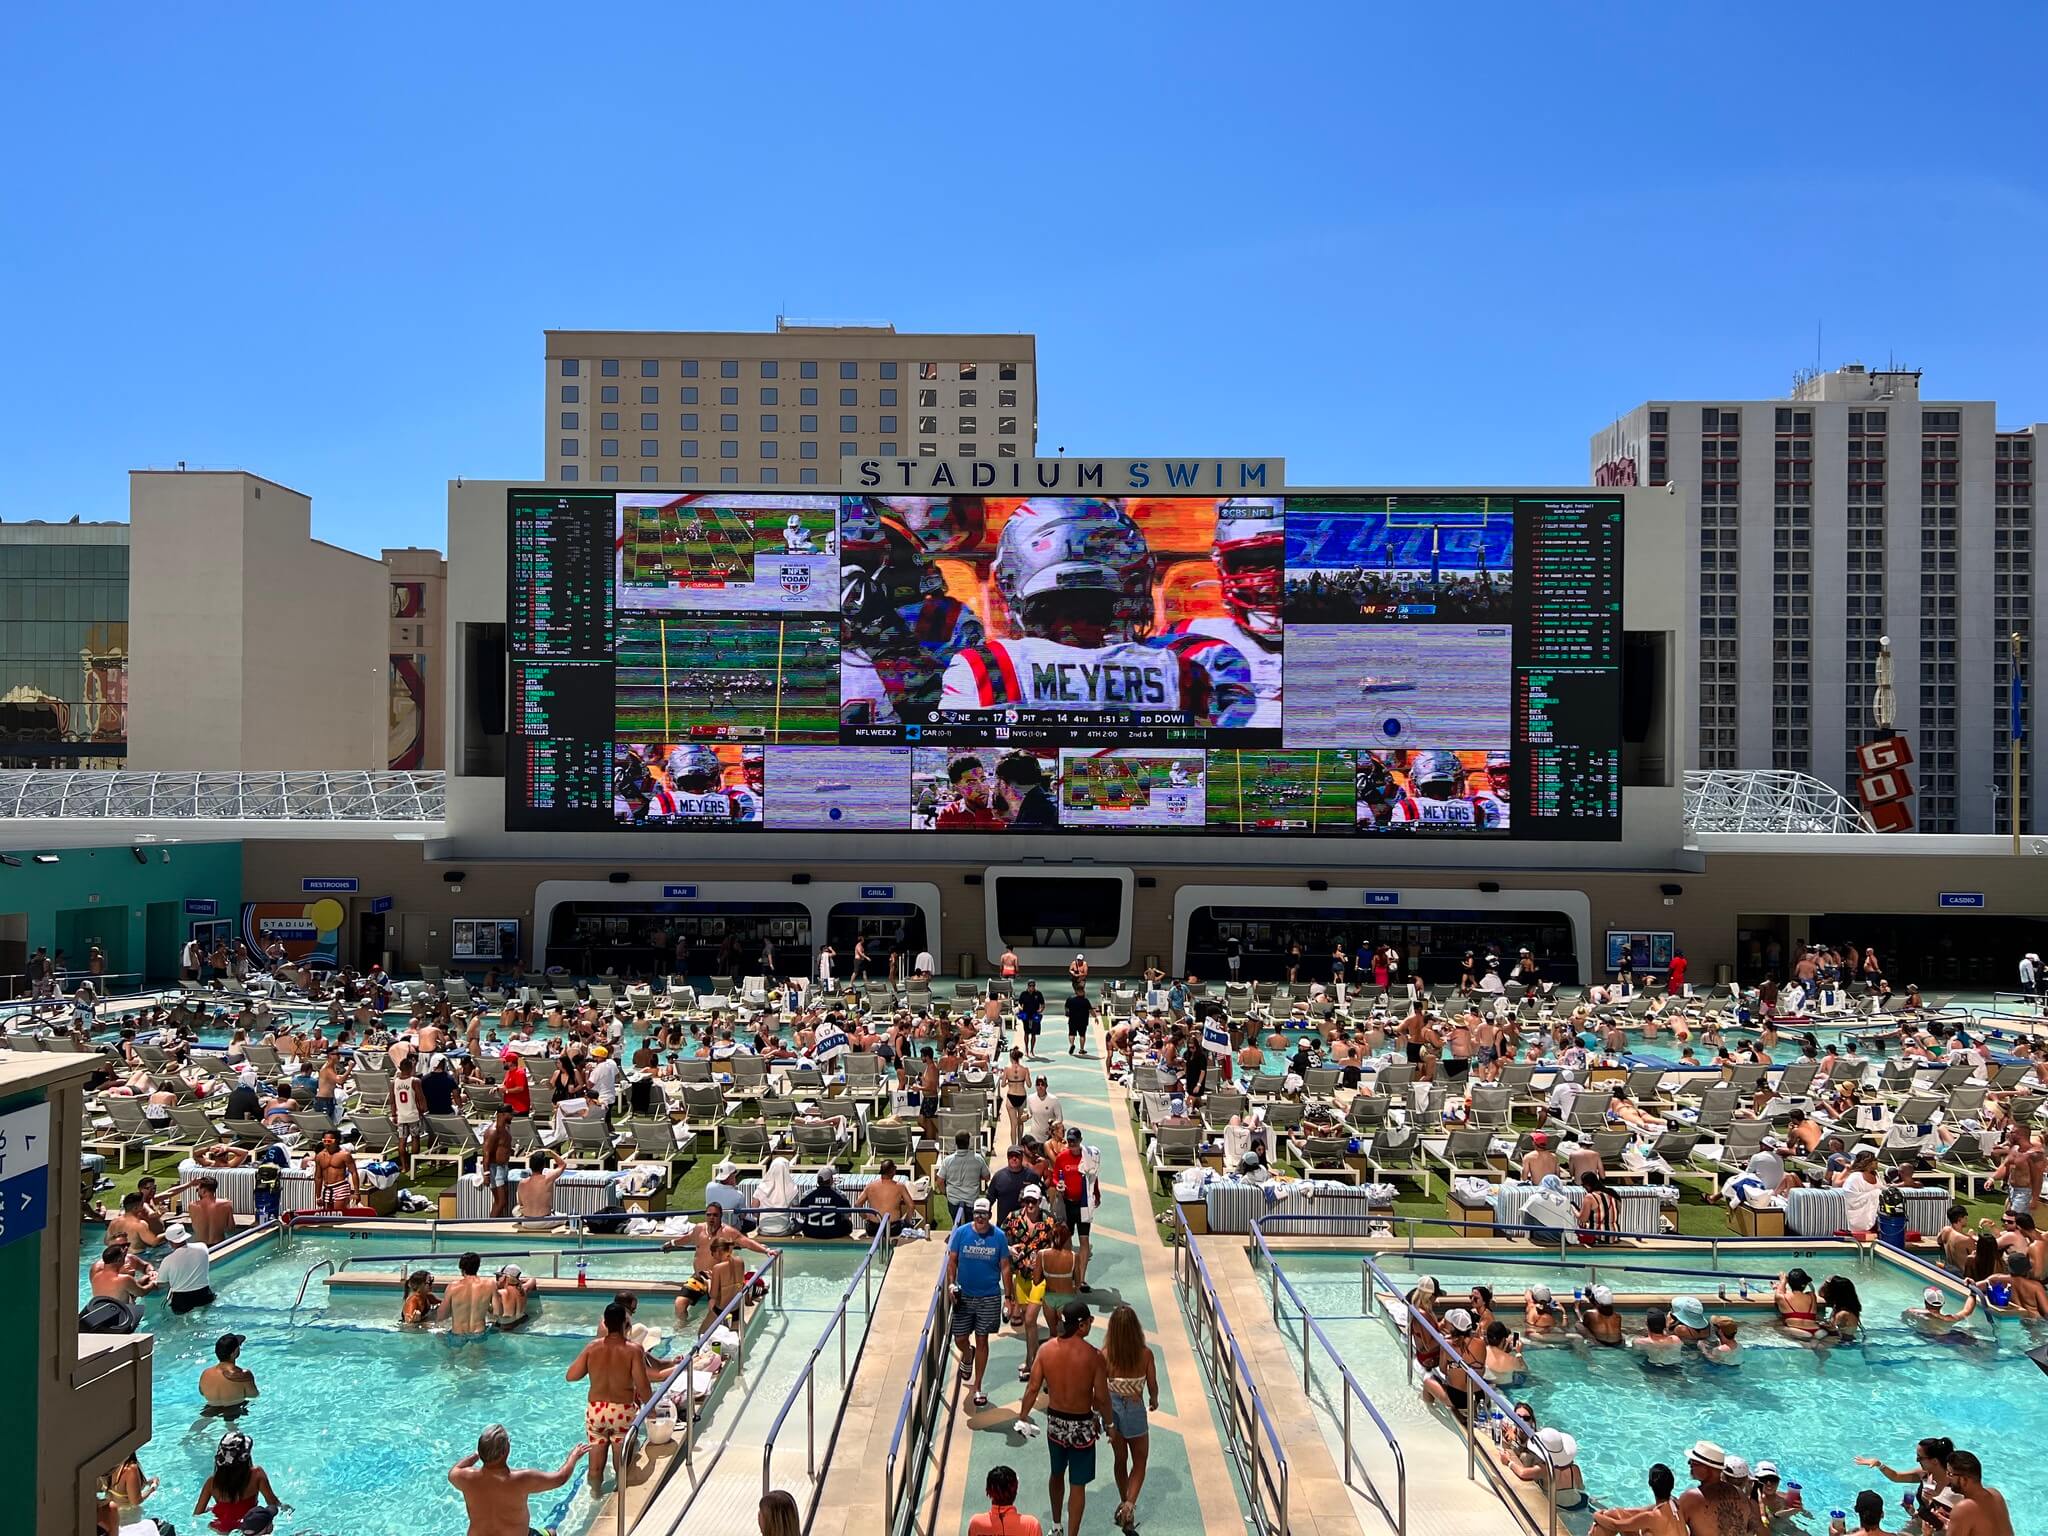 pool party attendees watch jumbo TV screens